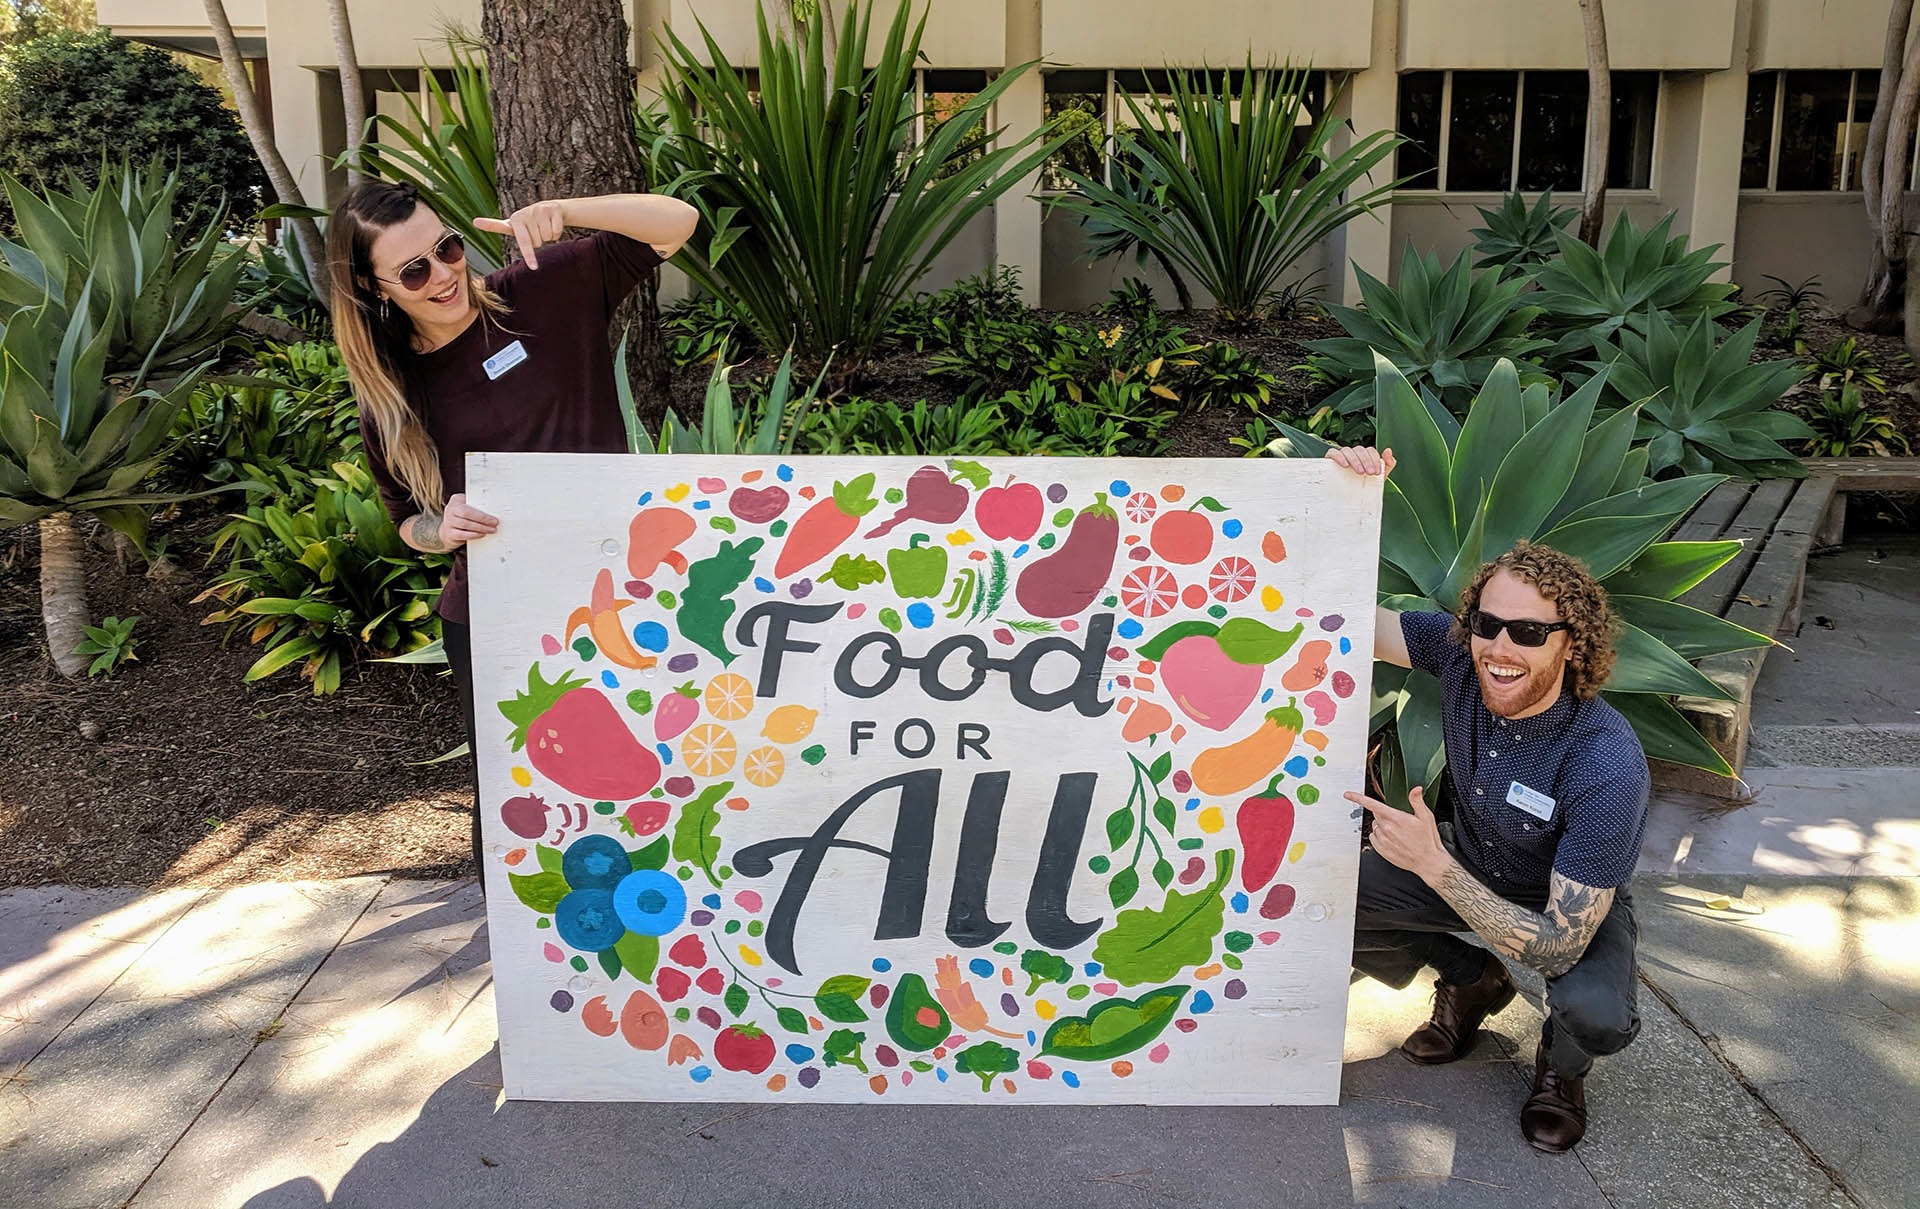 Two people pointing to a sign that says "Food for All"